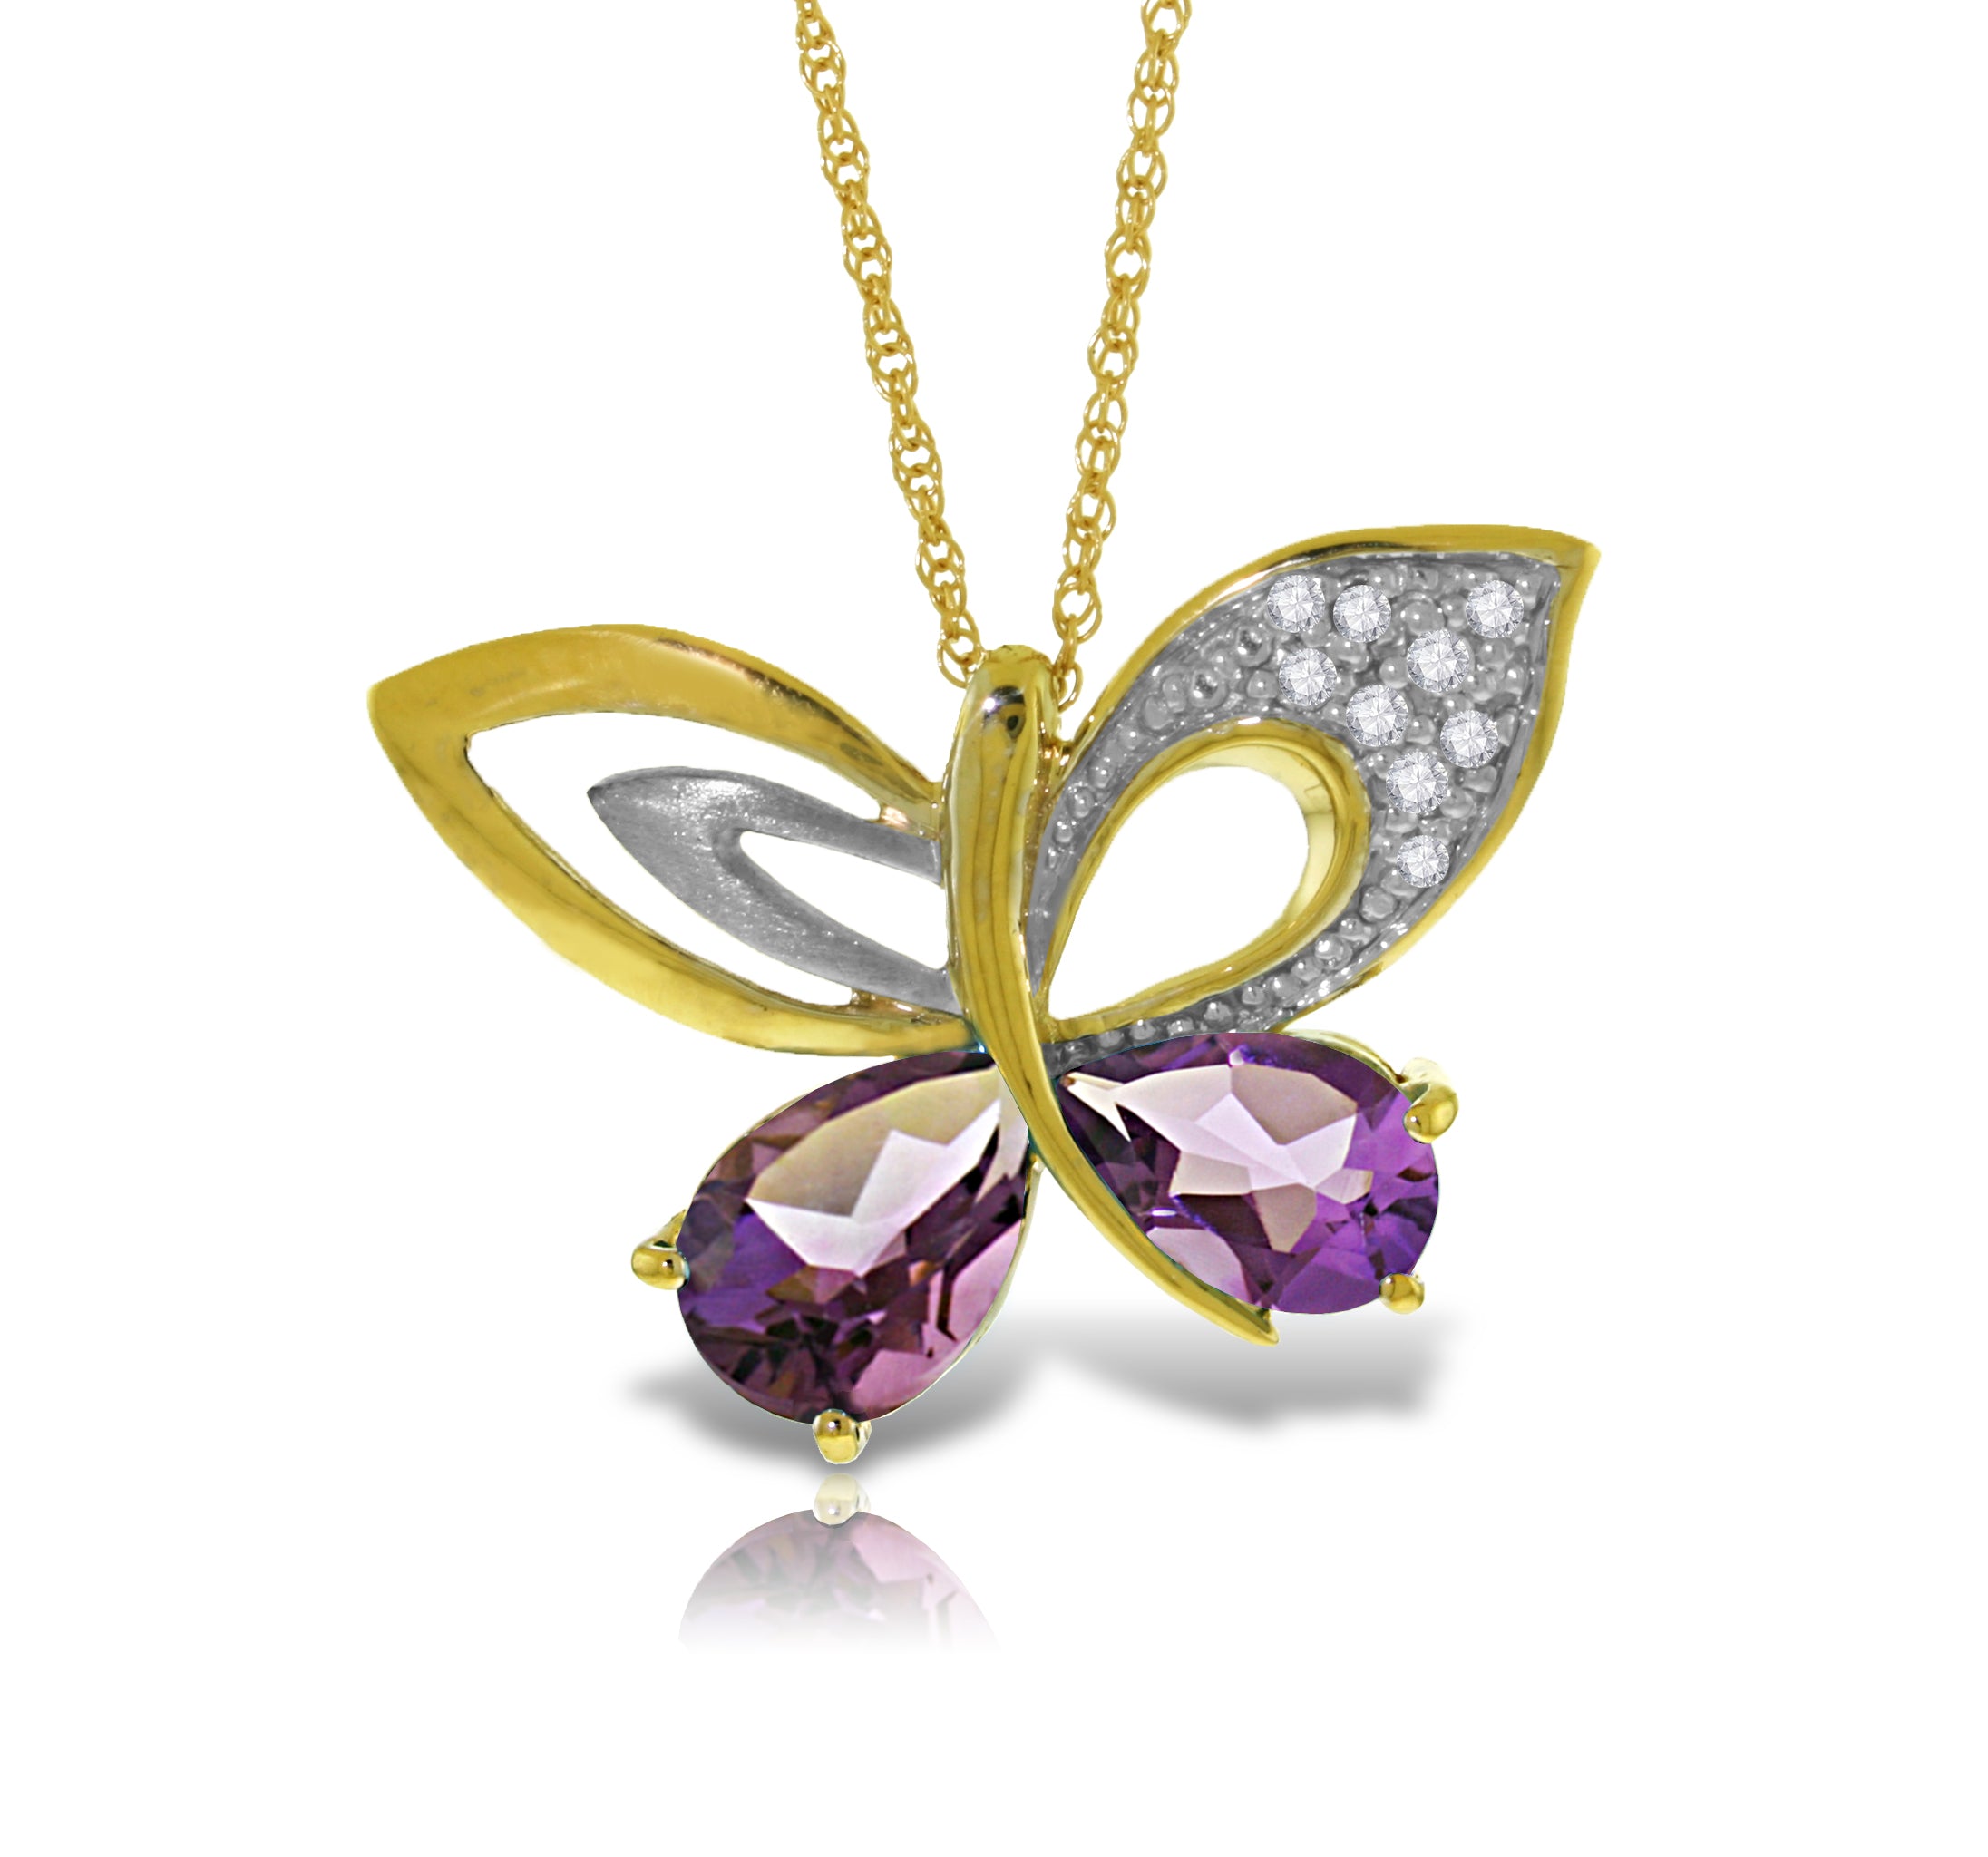 14K Solid Yellow Gold Butterfly Natural Diamond & Amethyst Necklace